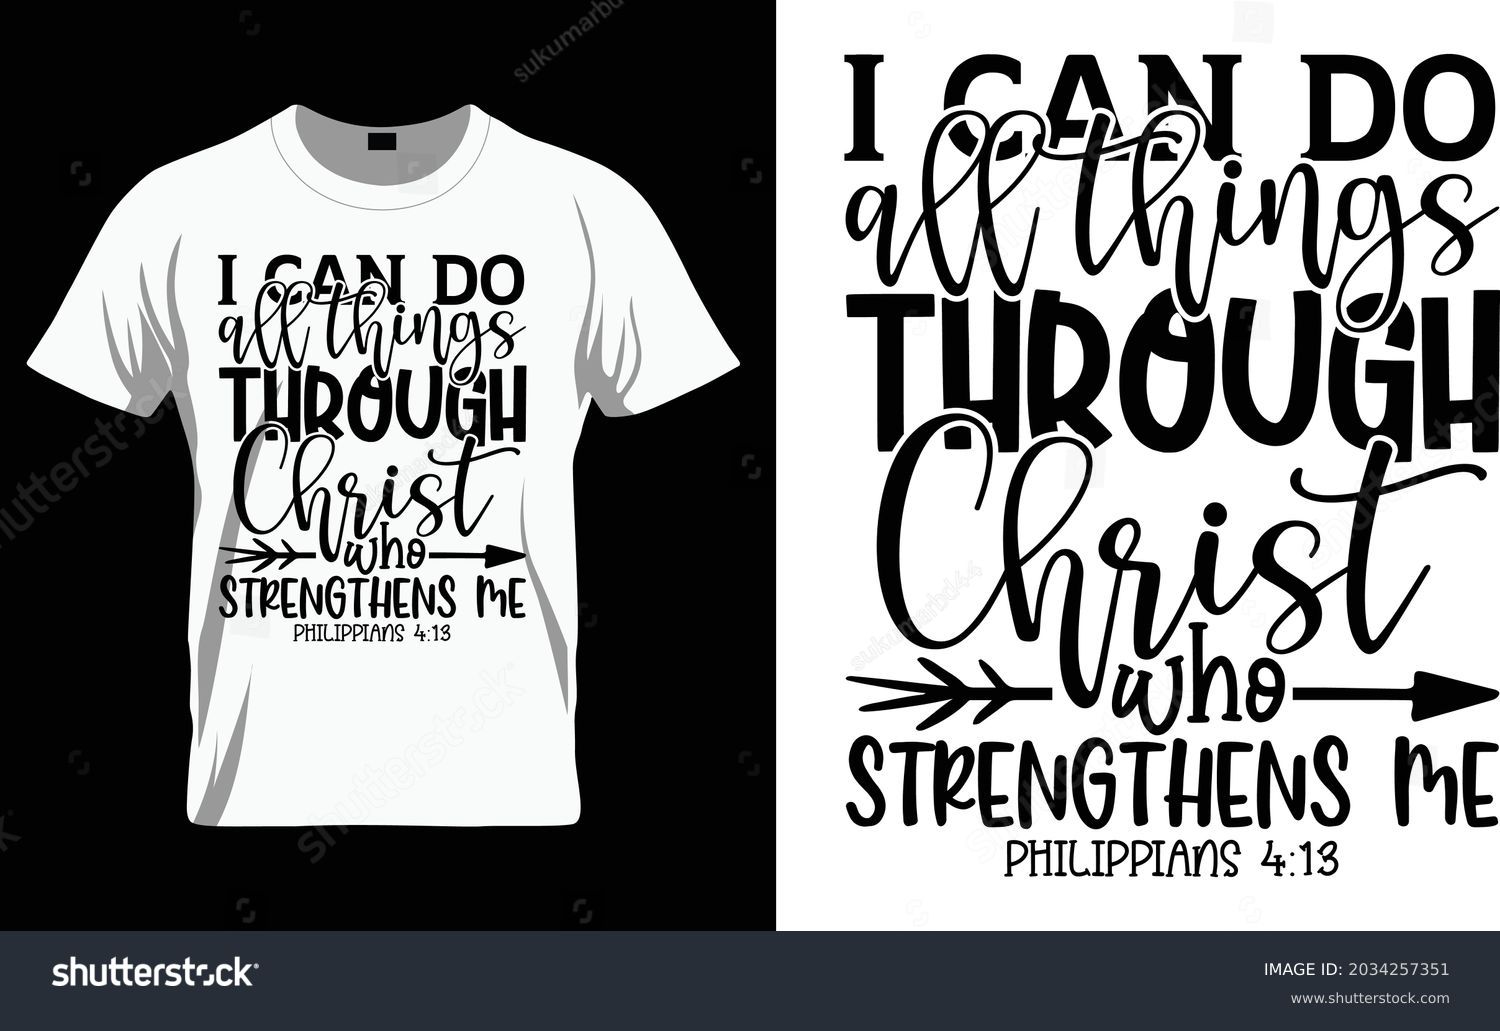 SVG of I can do all things through Christ who strengthens me philippians 4:13 - Bible Verse t shirts design, Hand drawn lettering phrase, Calligraphy t shirt design, Isolated on white background, svg Files f svg